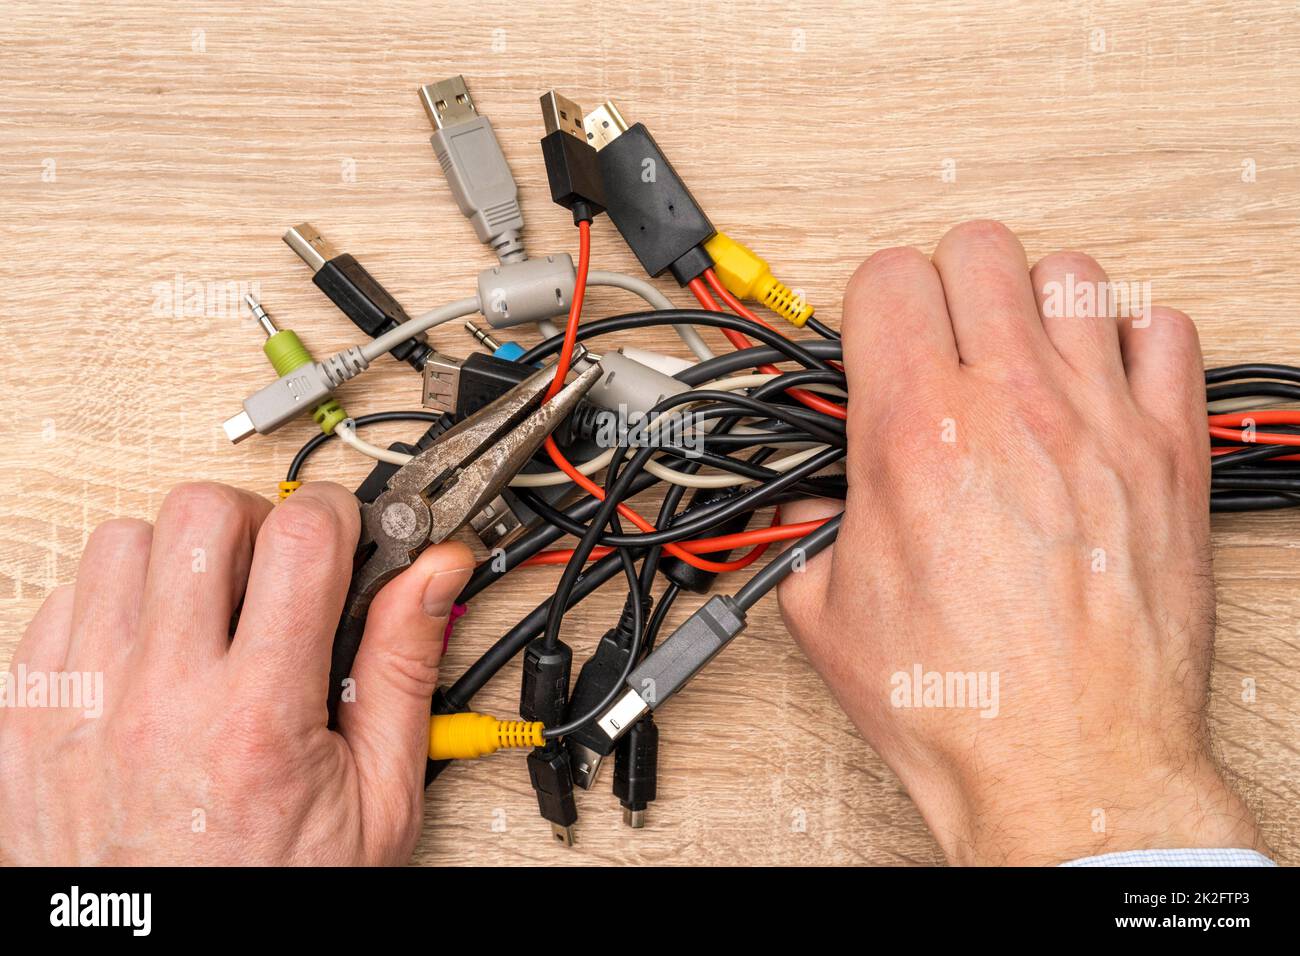 Hands of the master hold wire cutters and bundle of computer cables Stock Photo